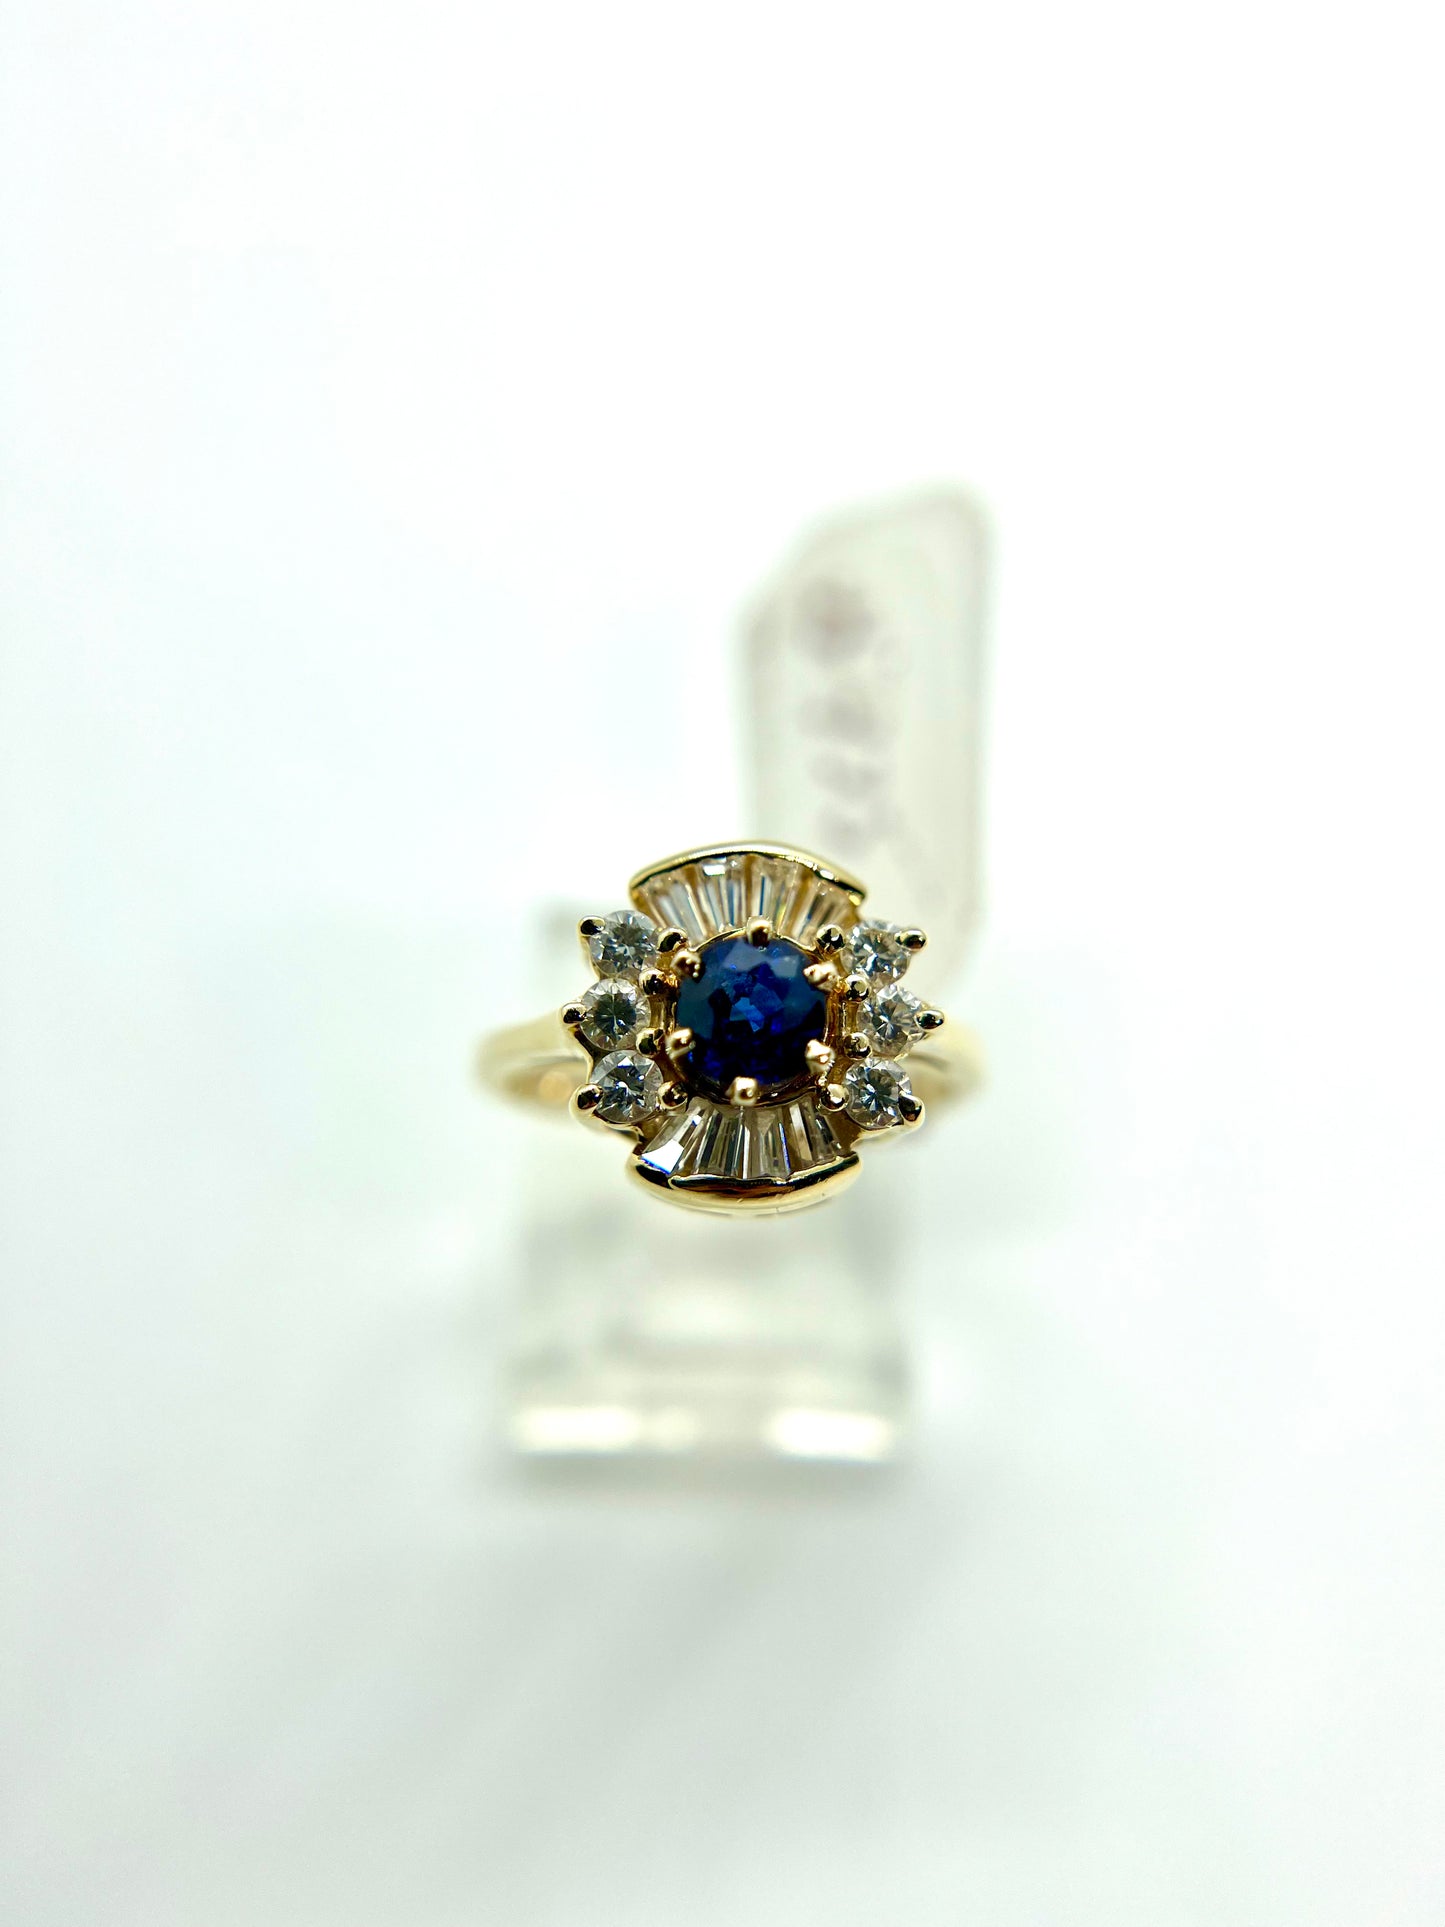 Sapphire cocktail ring